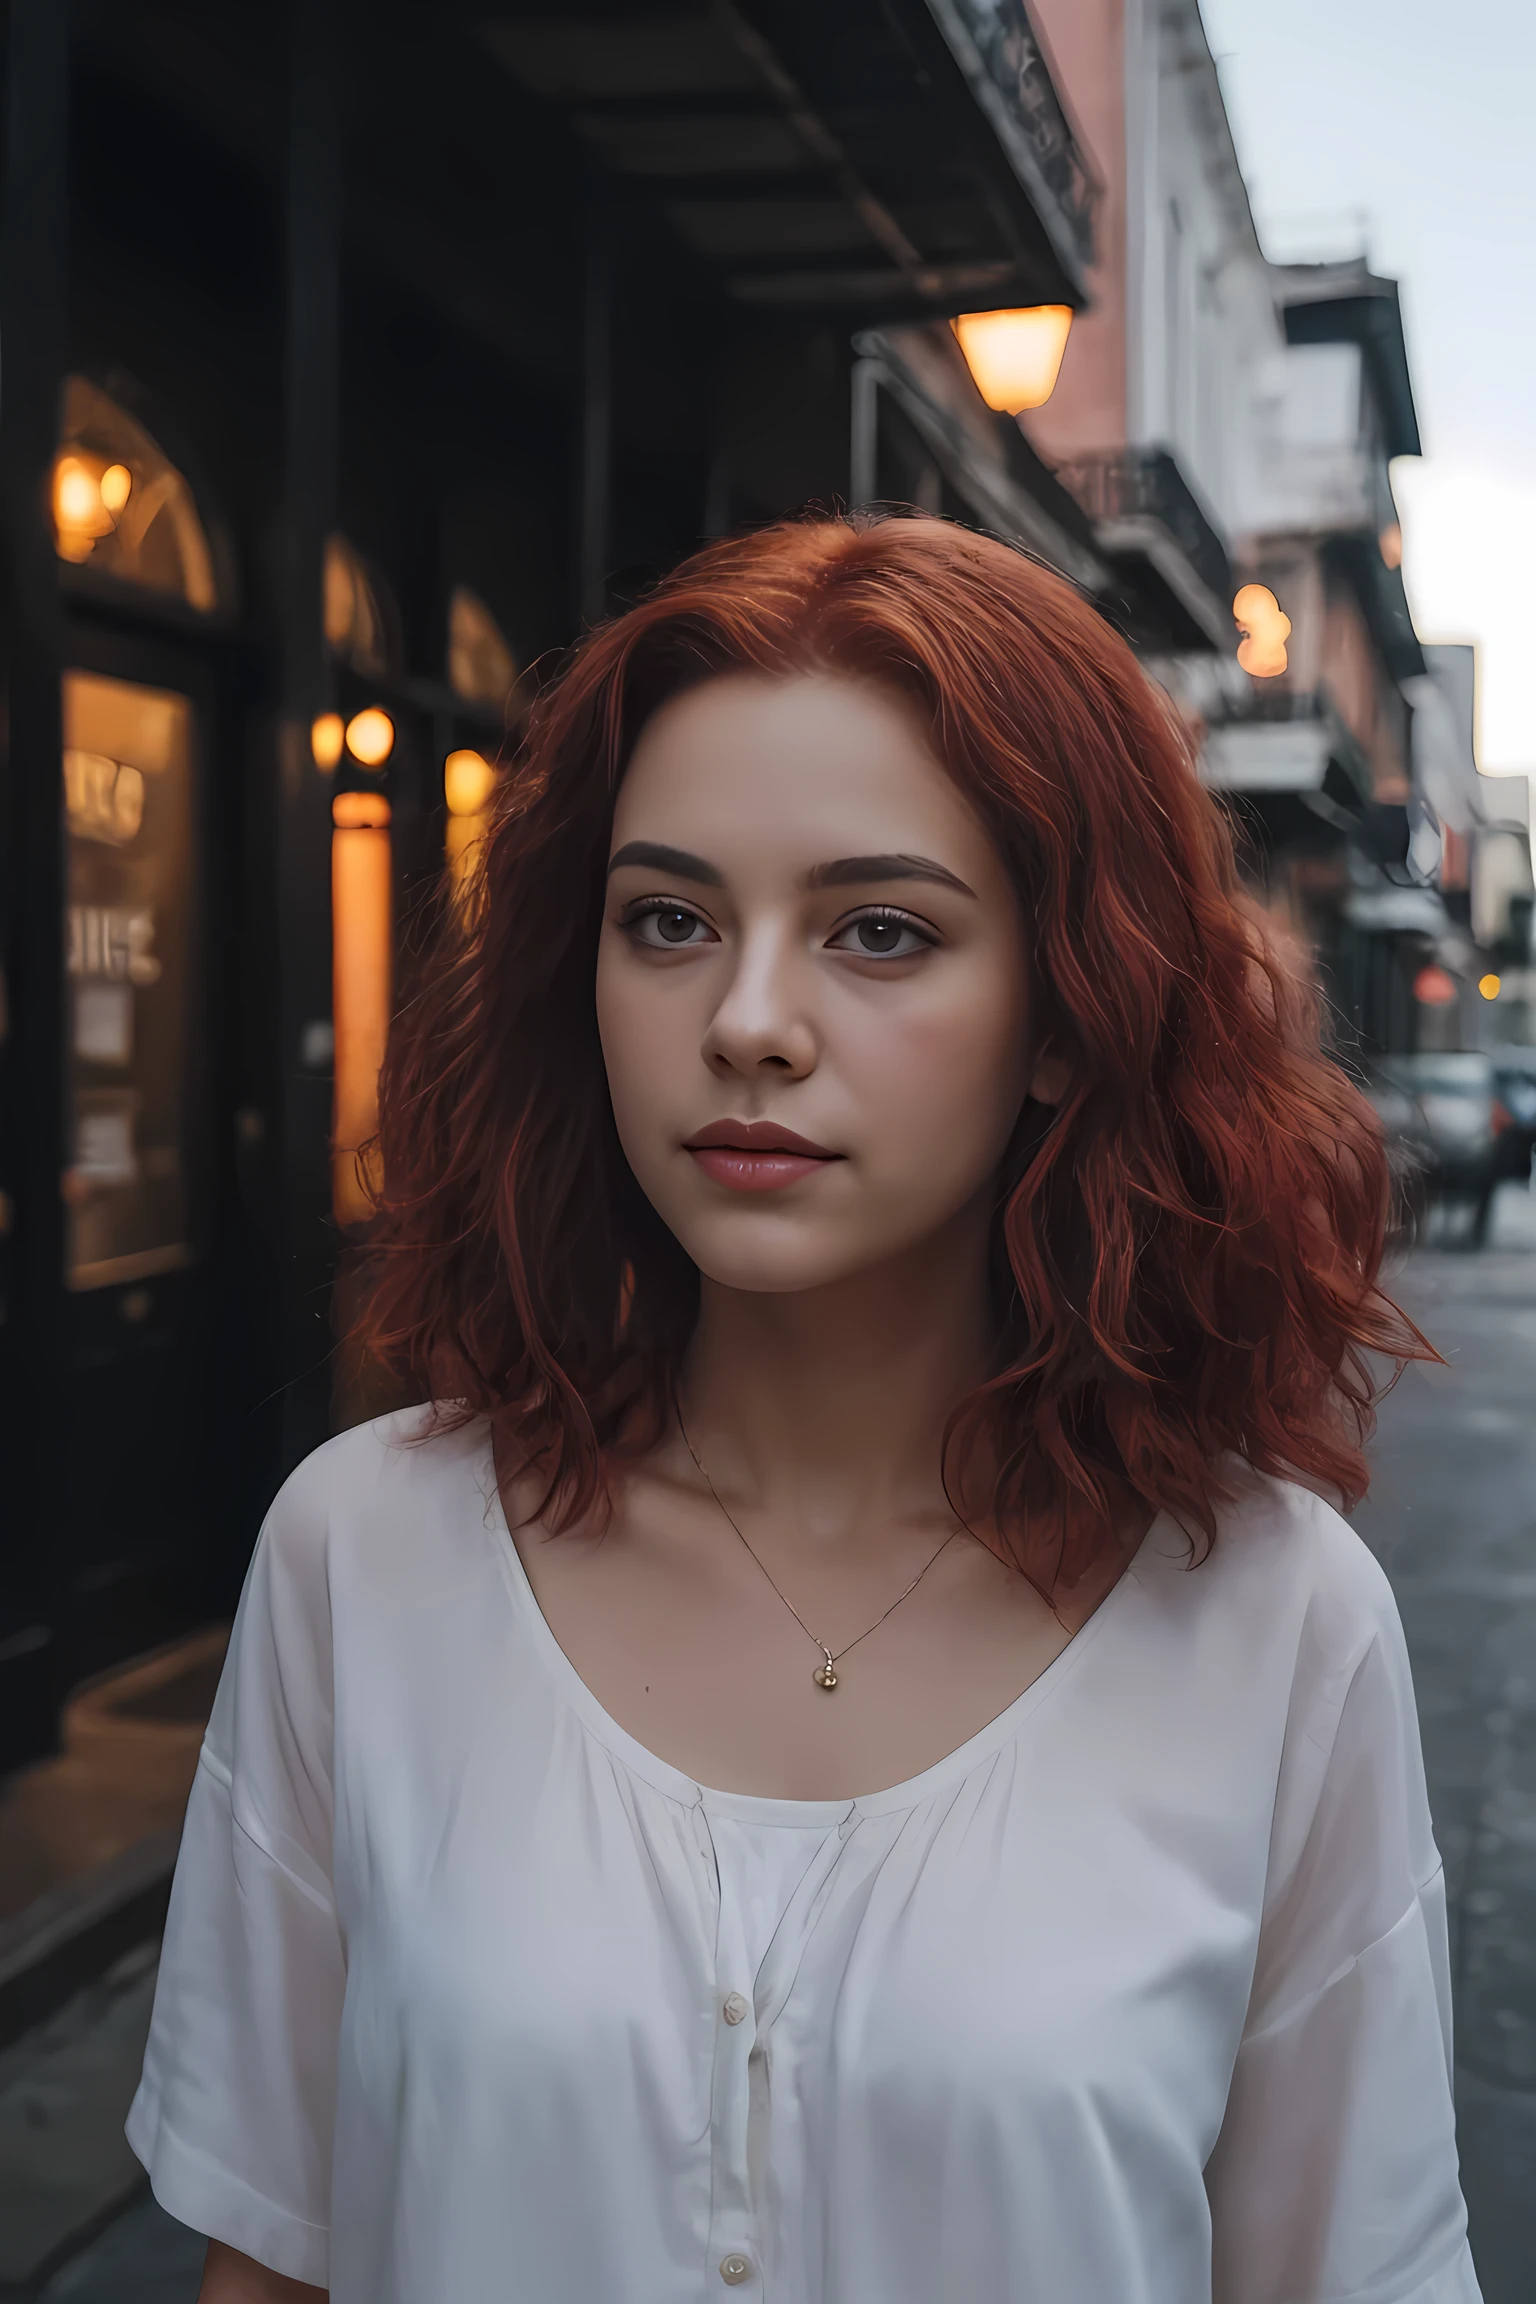 Cinematic, realistic, close-up, cinematic documentary of a 22-year-old woman with vibrant red hair and eyes the hue of twilight, embracing the lively spirit of New Orleans, Louisiana, the city’s music and history resonating with her adventurous heart